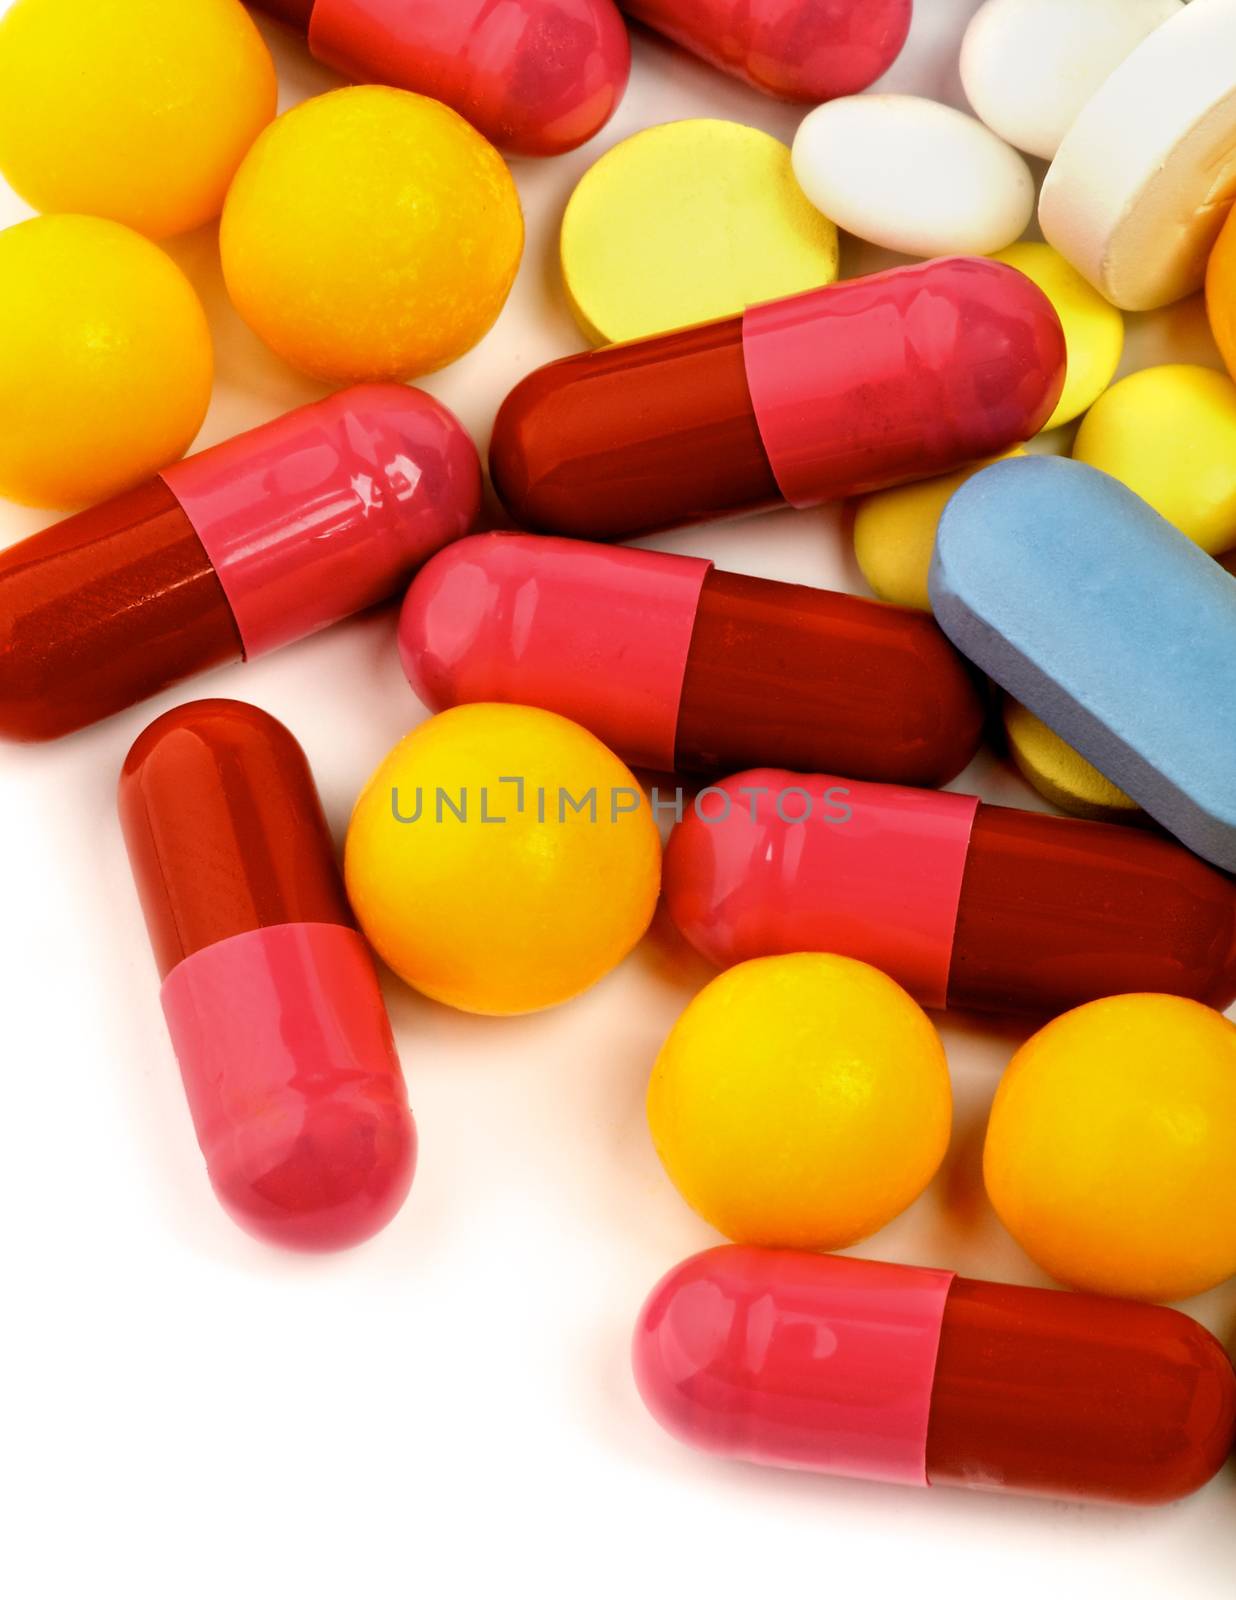 Heap of Various Pink, Red and Yellow Vitamin Pills closeup on White background